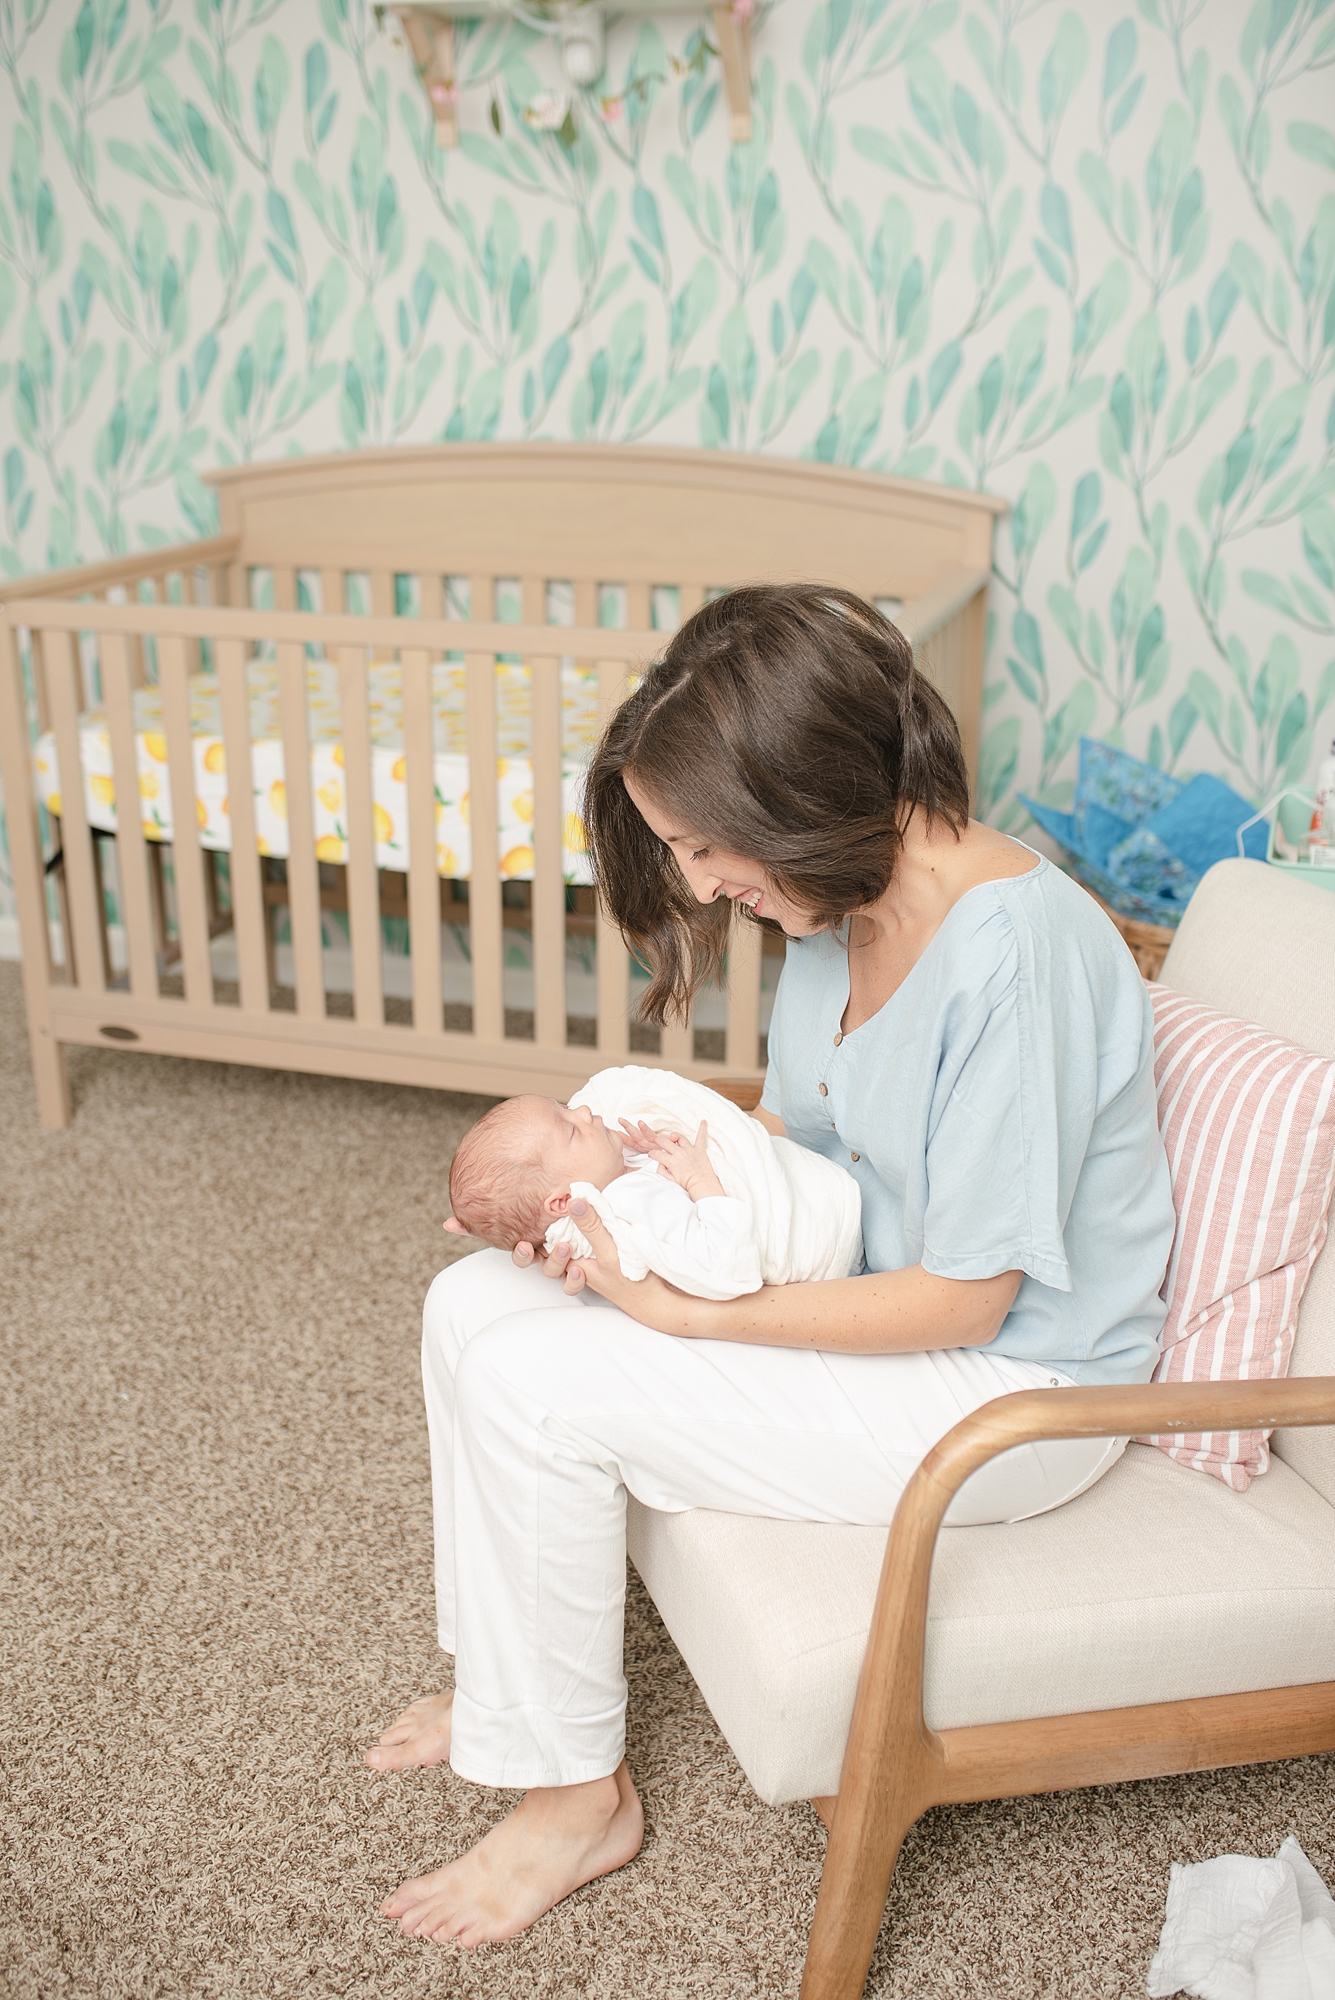 New mom is holding her baby daughter in a modern nursery